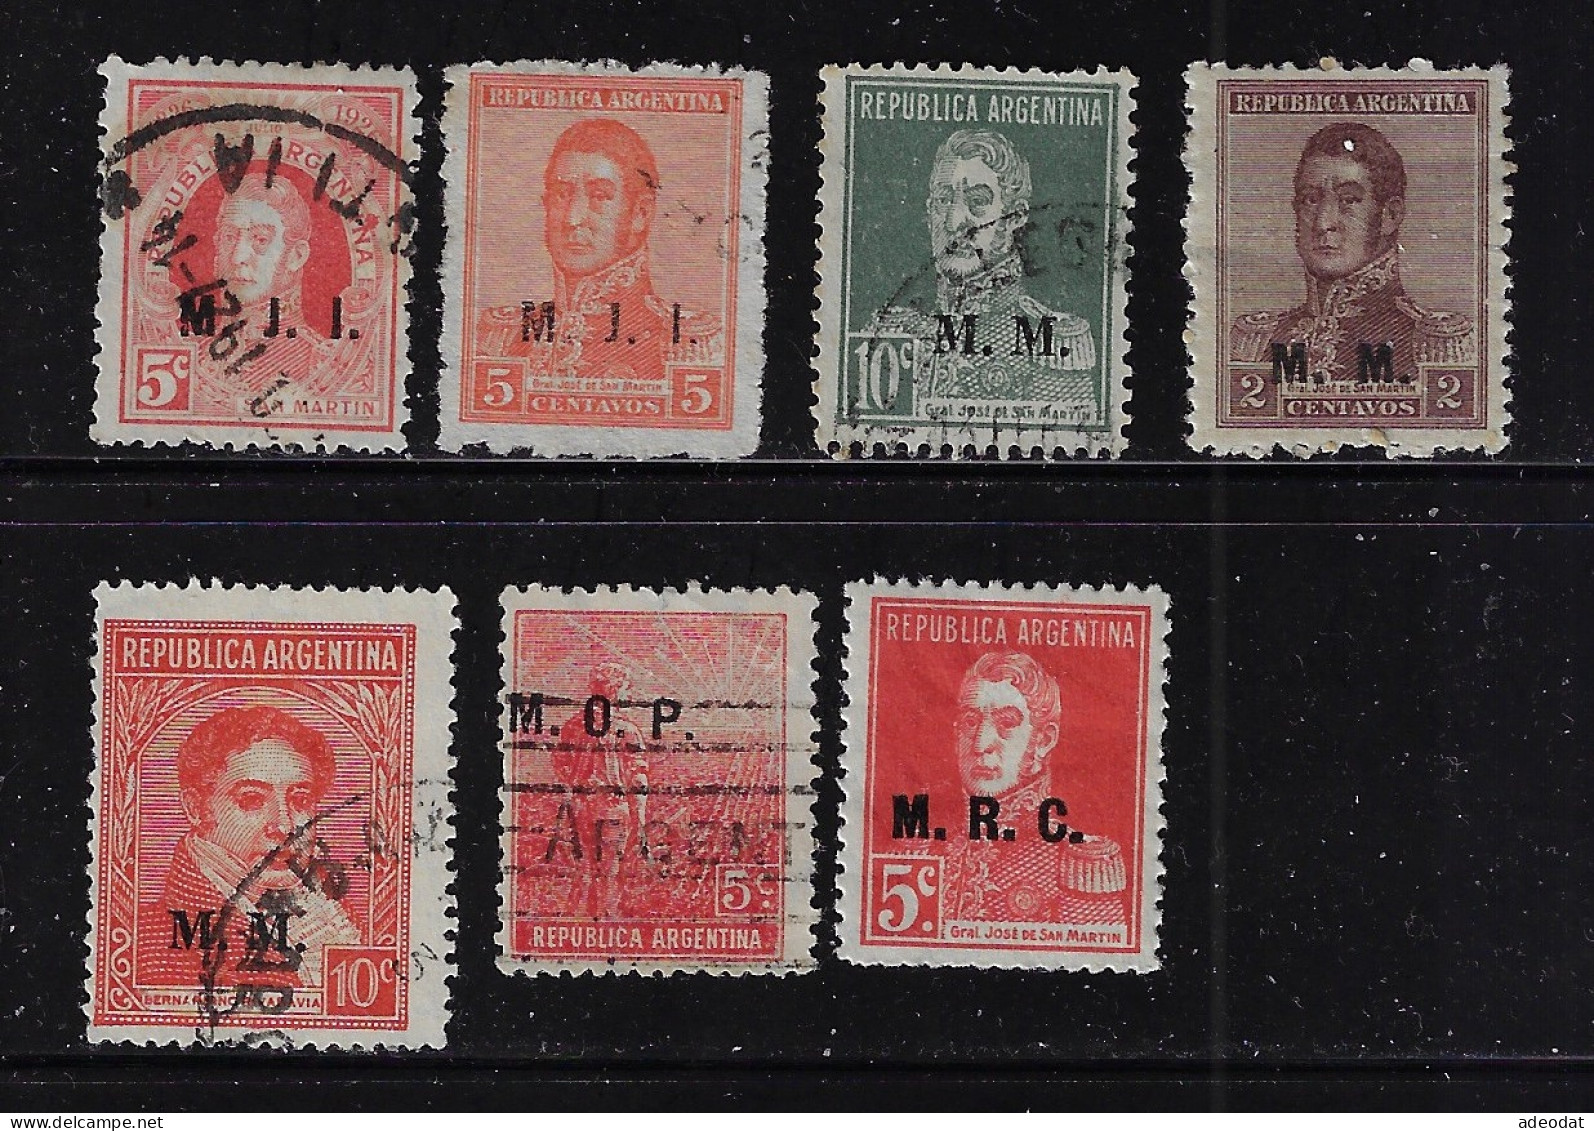 ARGENTINA 1913-1937  OFFICIAL DEPARTMENT STAMPS  SCOTT # 27 STAMPS USED  CV $5.40 C - Neufs